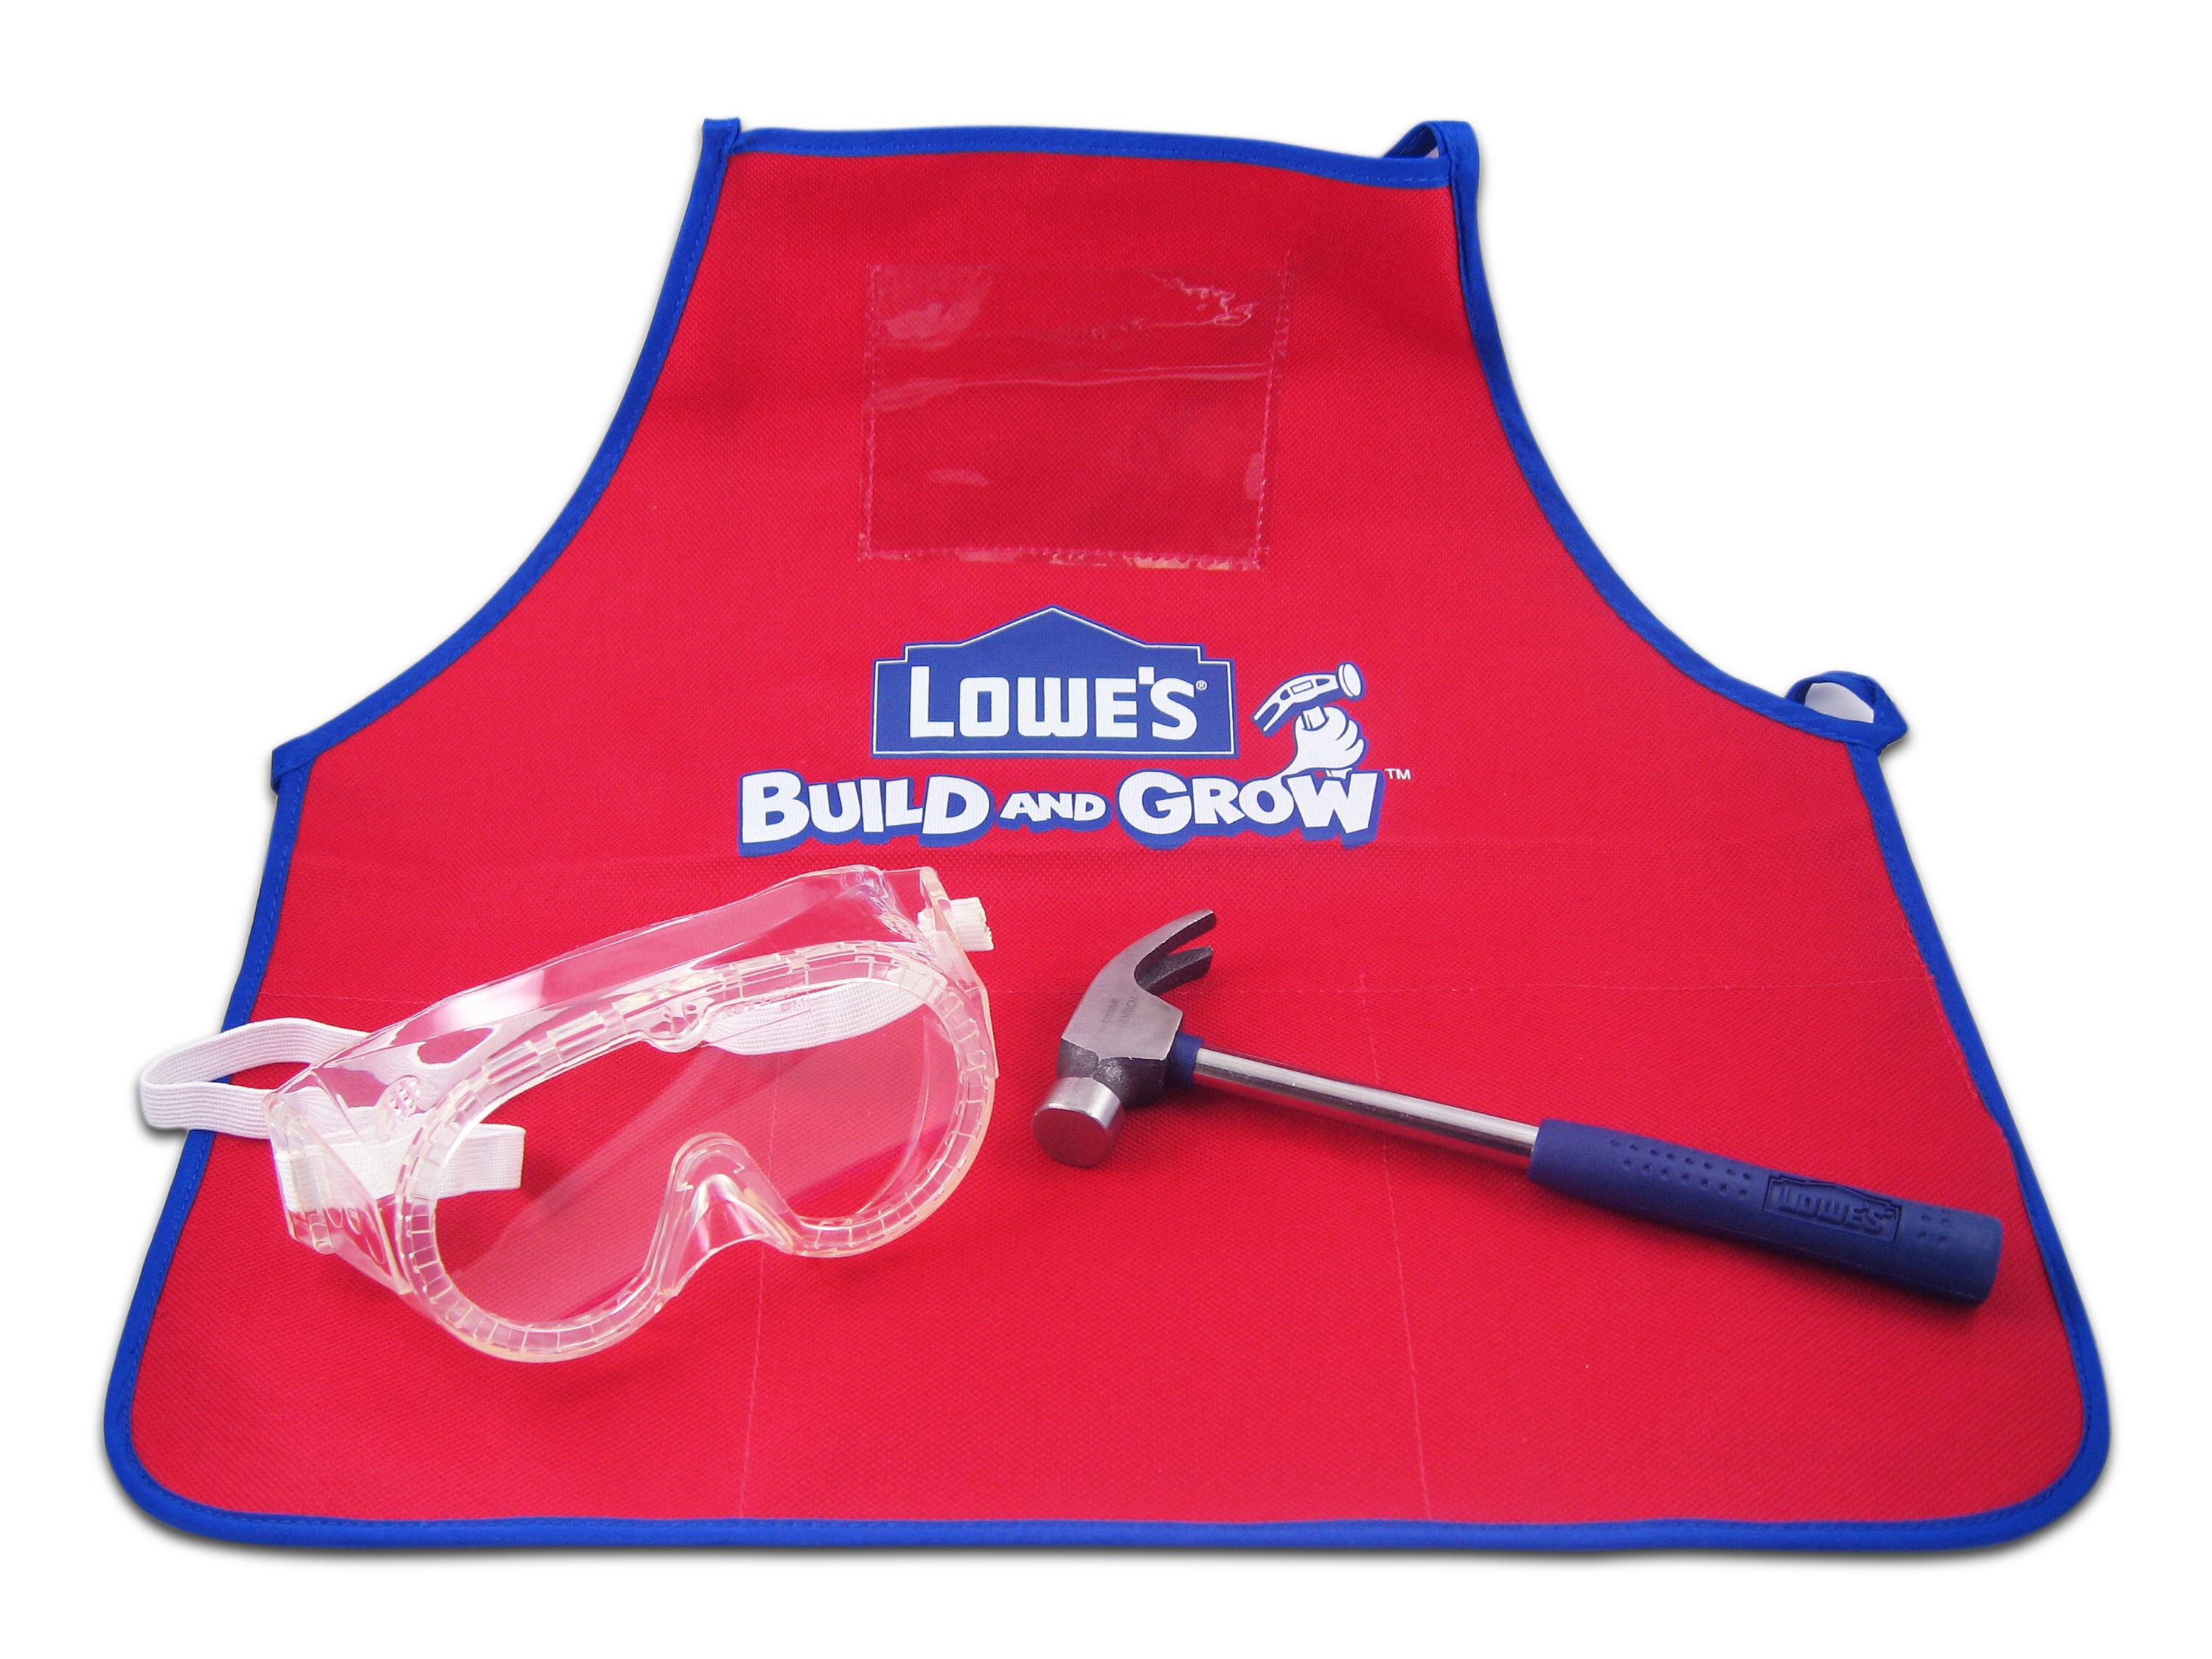 Details about   46 Lowes Build & Grow Child Kids Apron Pouch Tie Straps Craft Play Dress-up Work